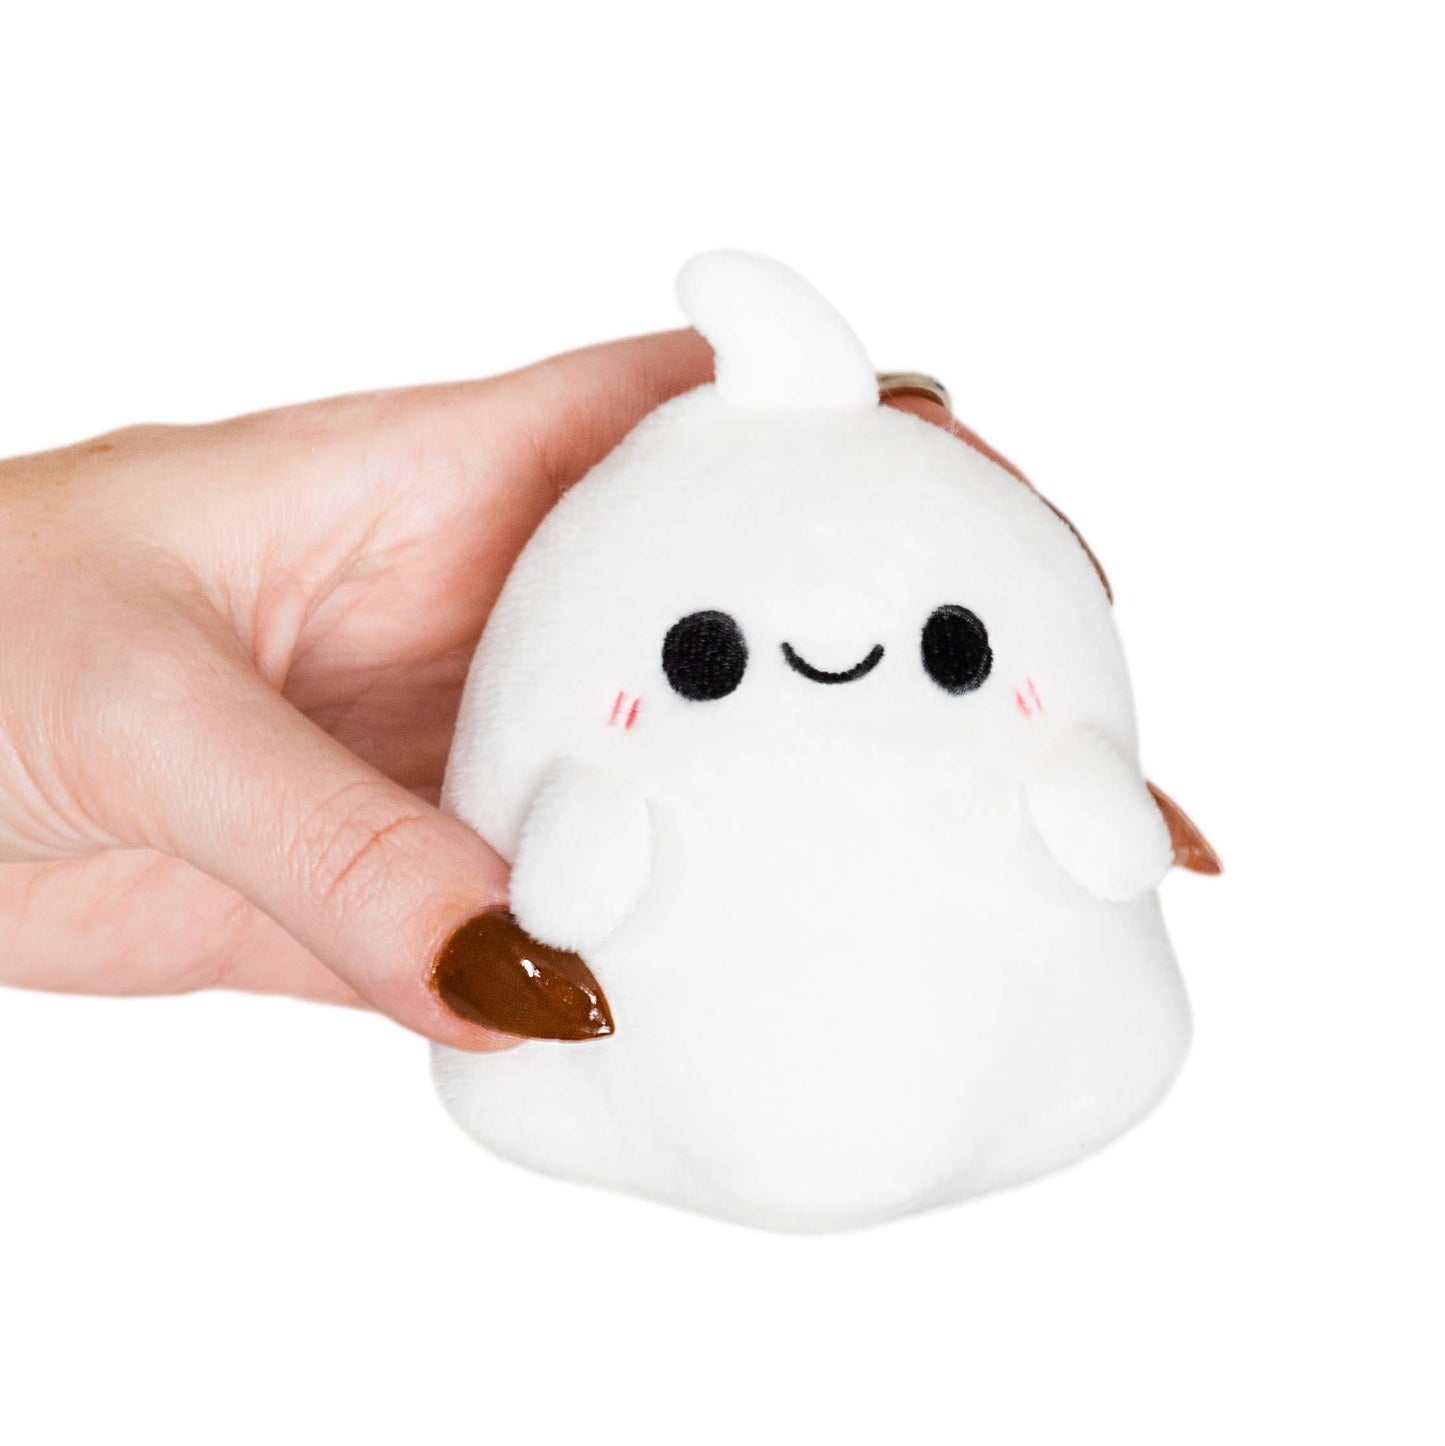 Micro Squishable Spooky Ghost